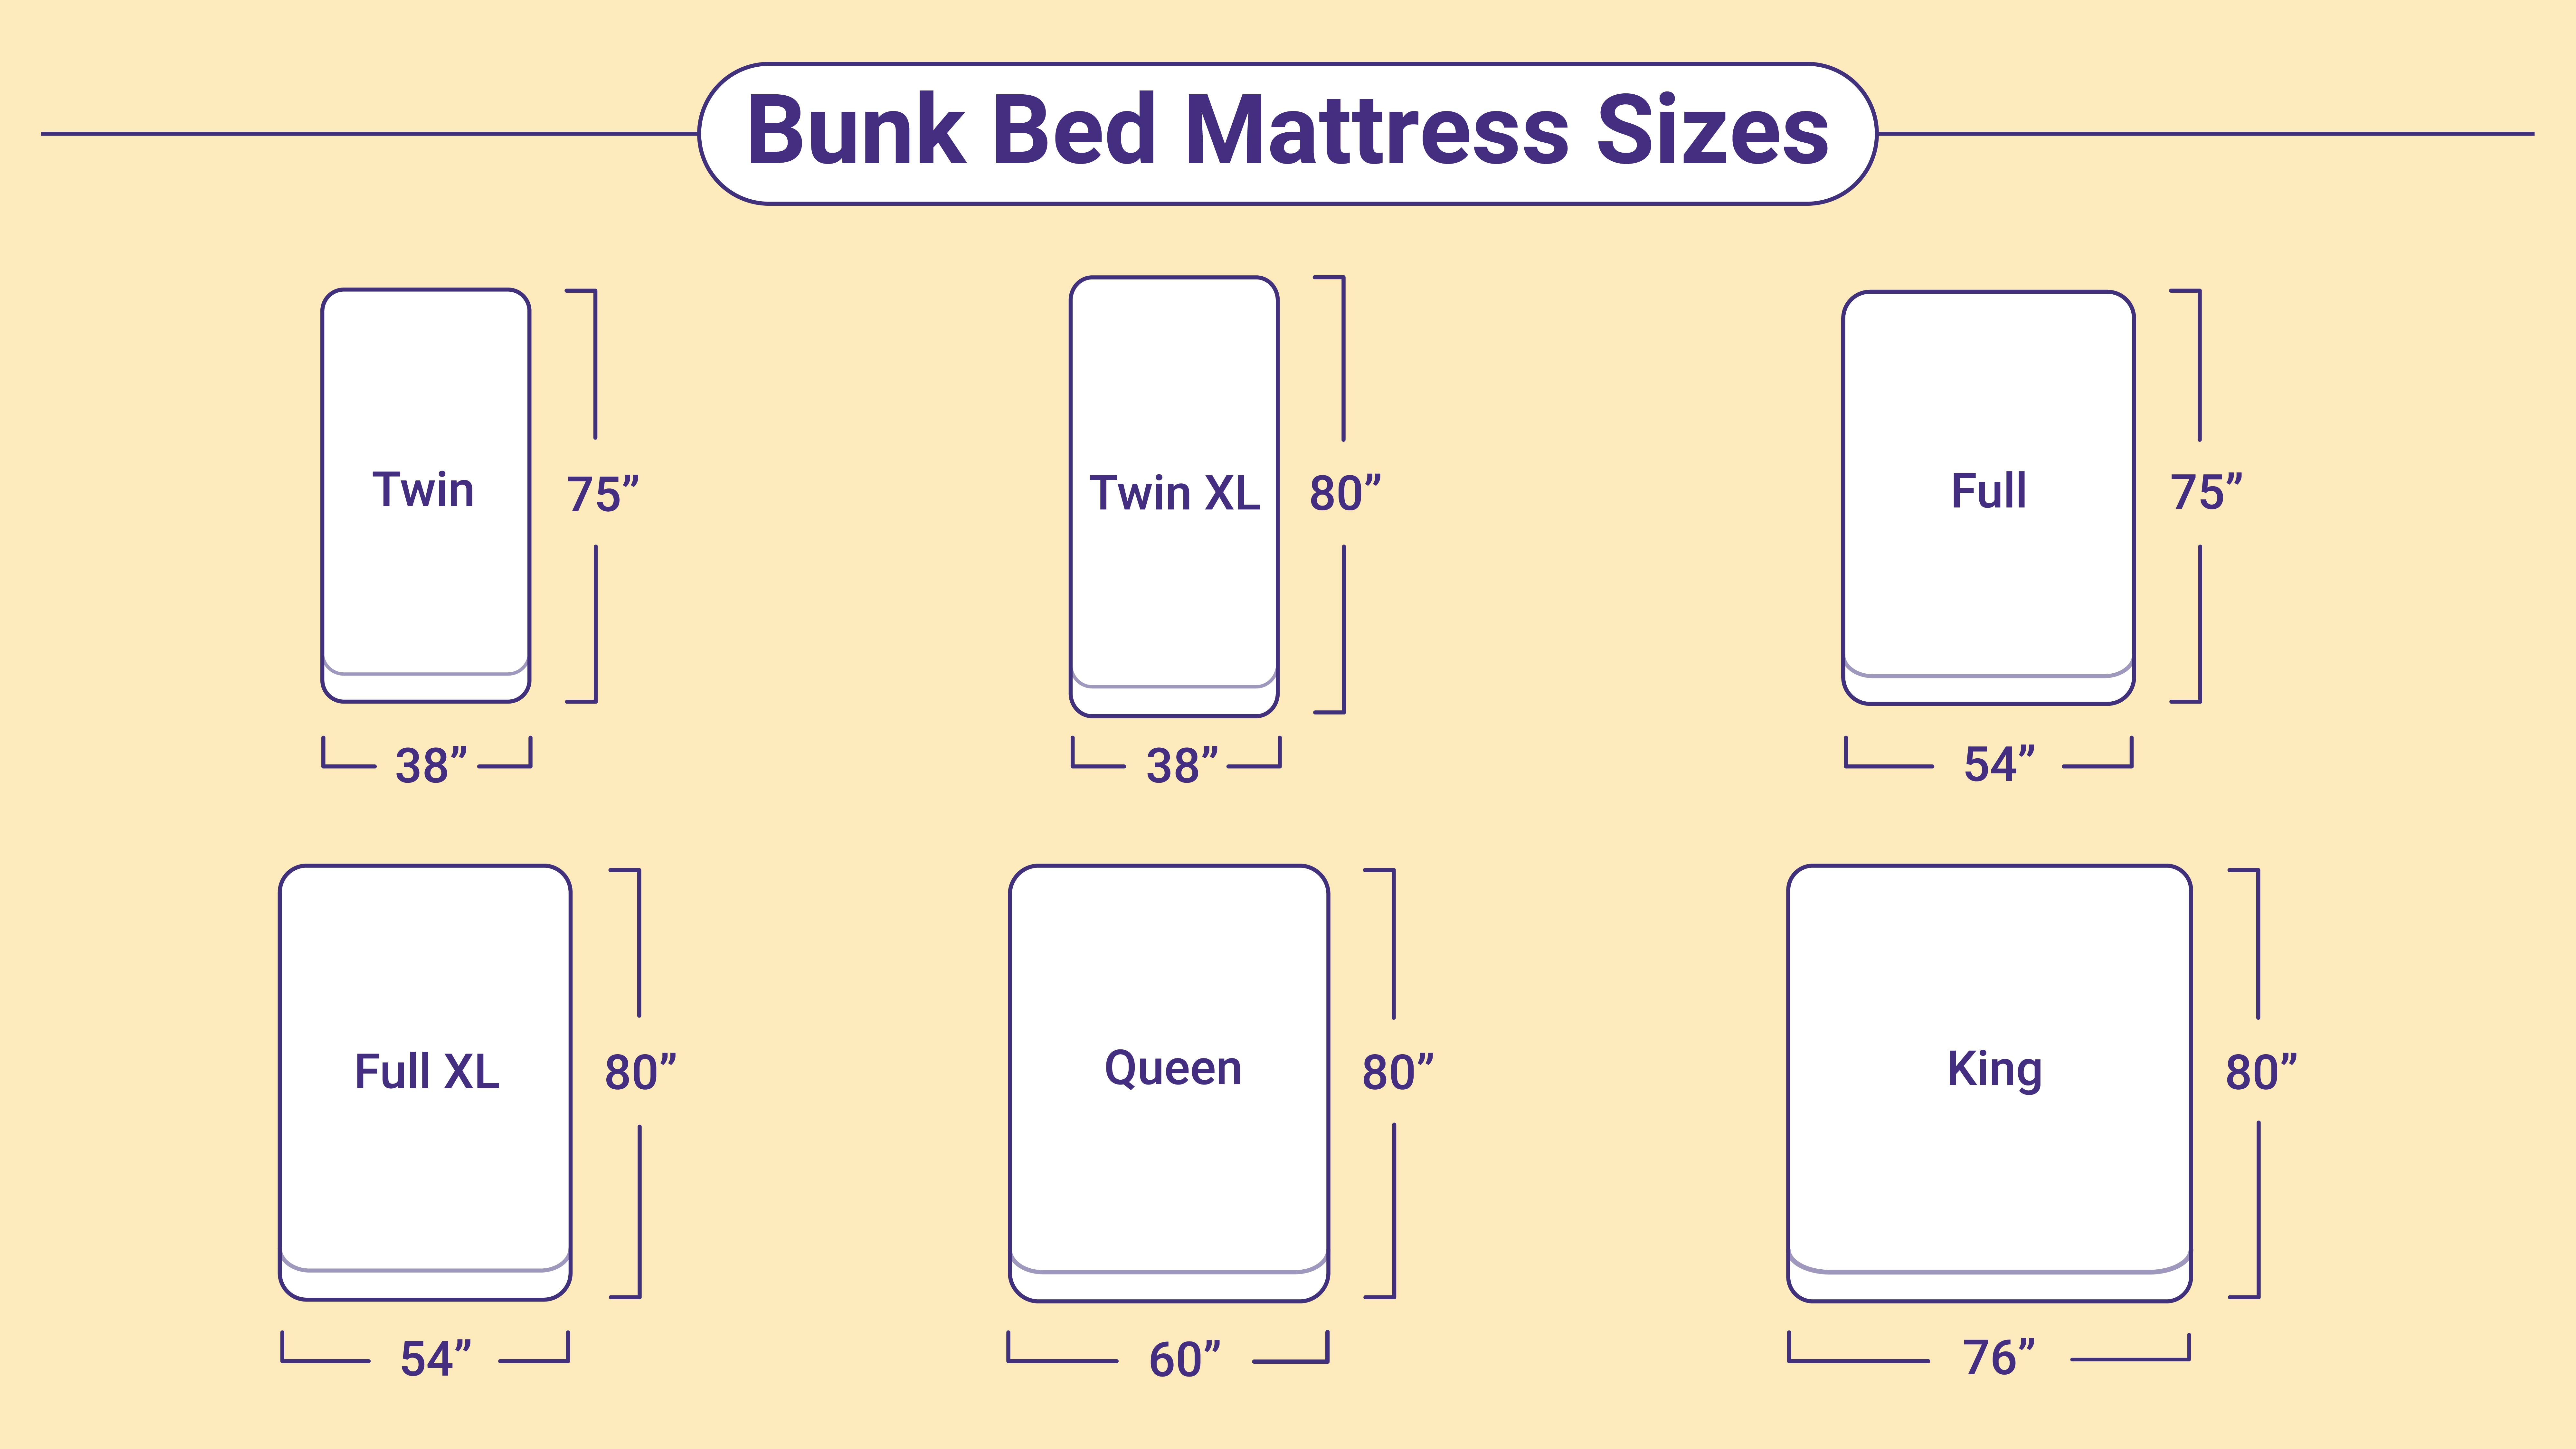 Bunk Bed Mattress Sizes And Dimensions, Twin Bed Mattress Size Cm